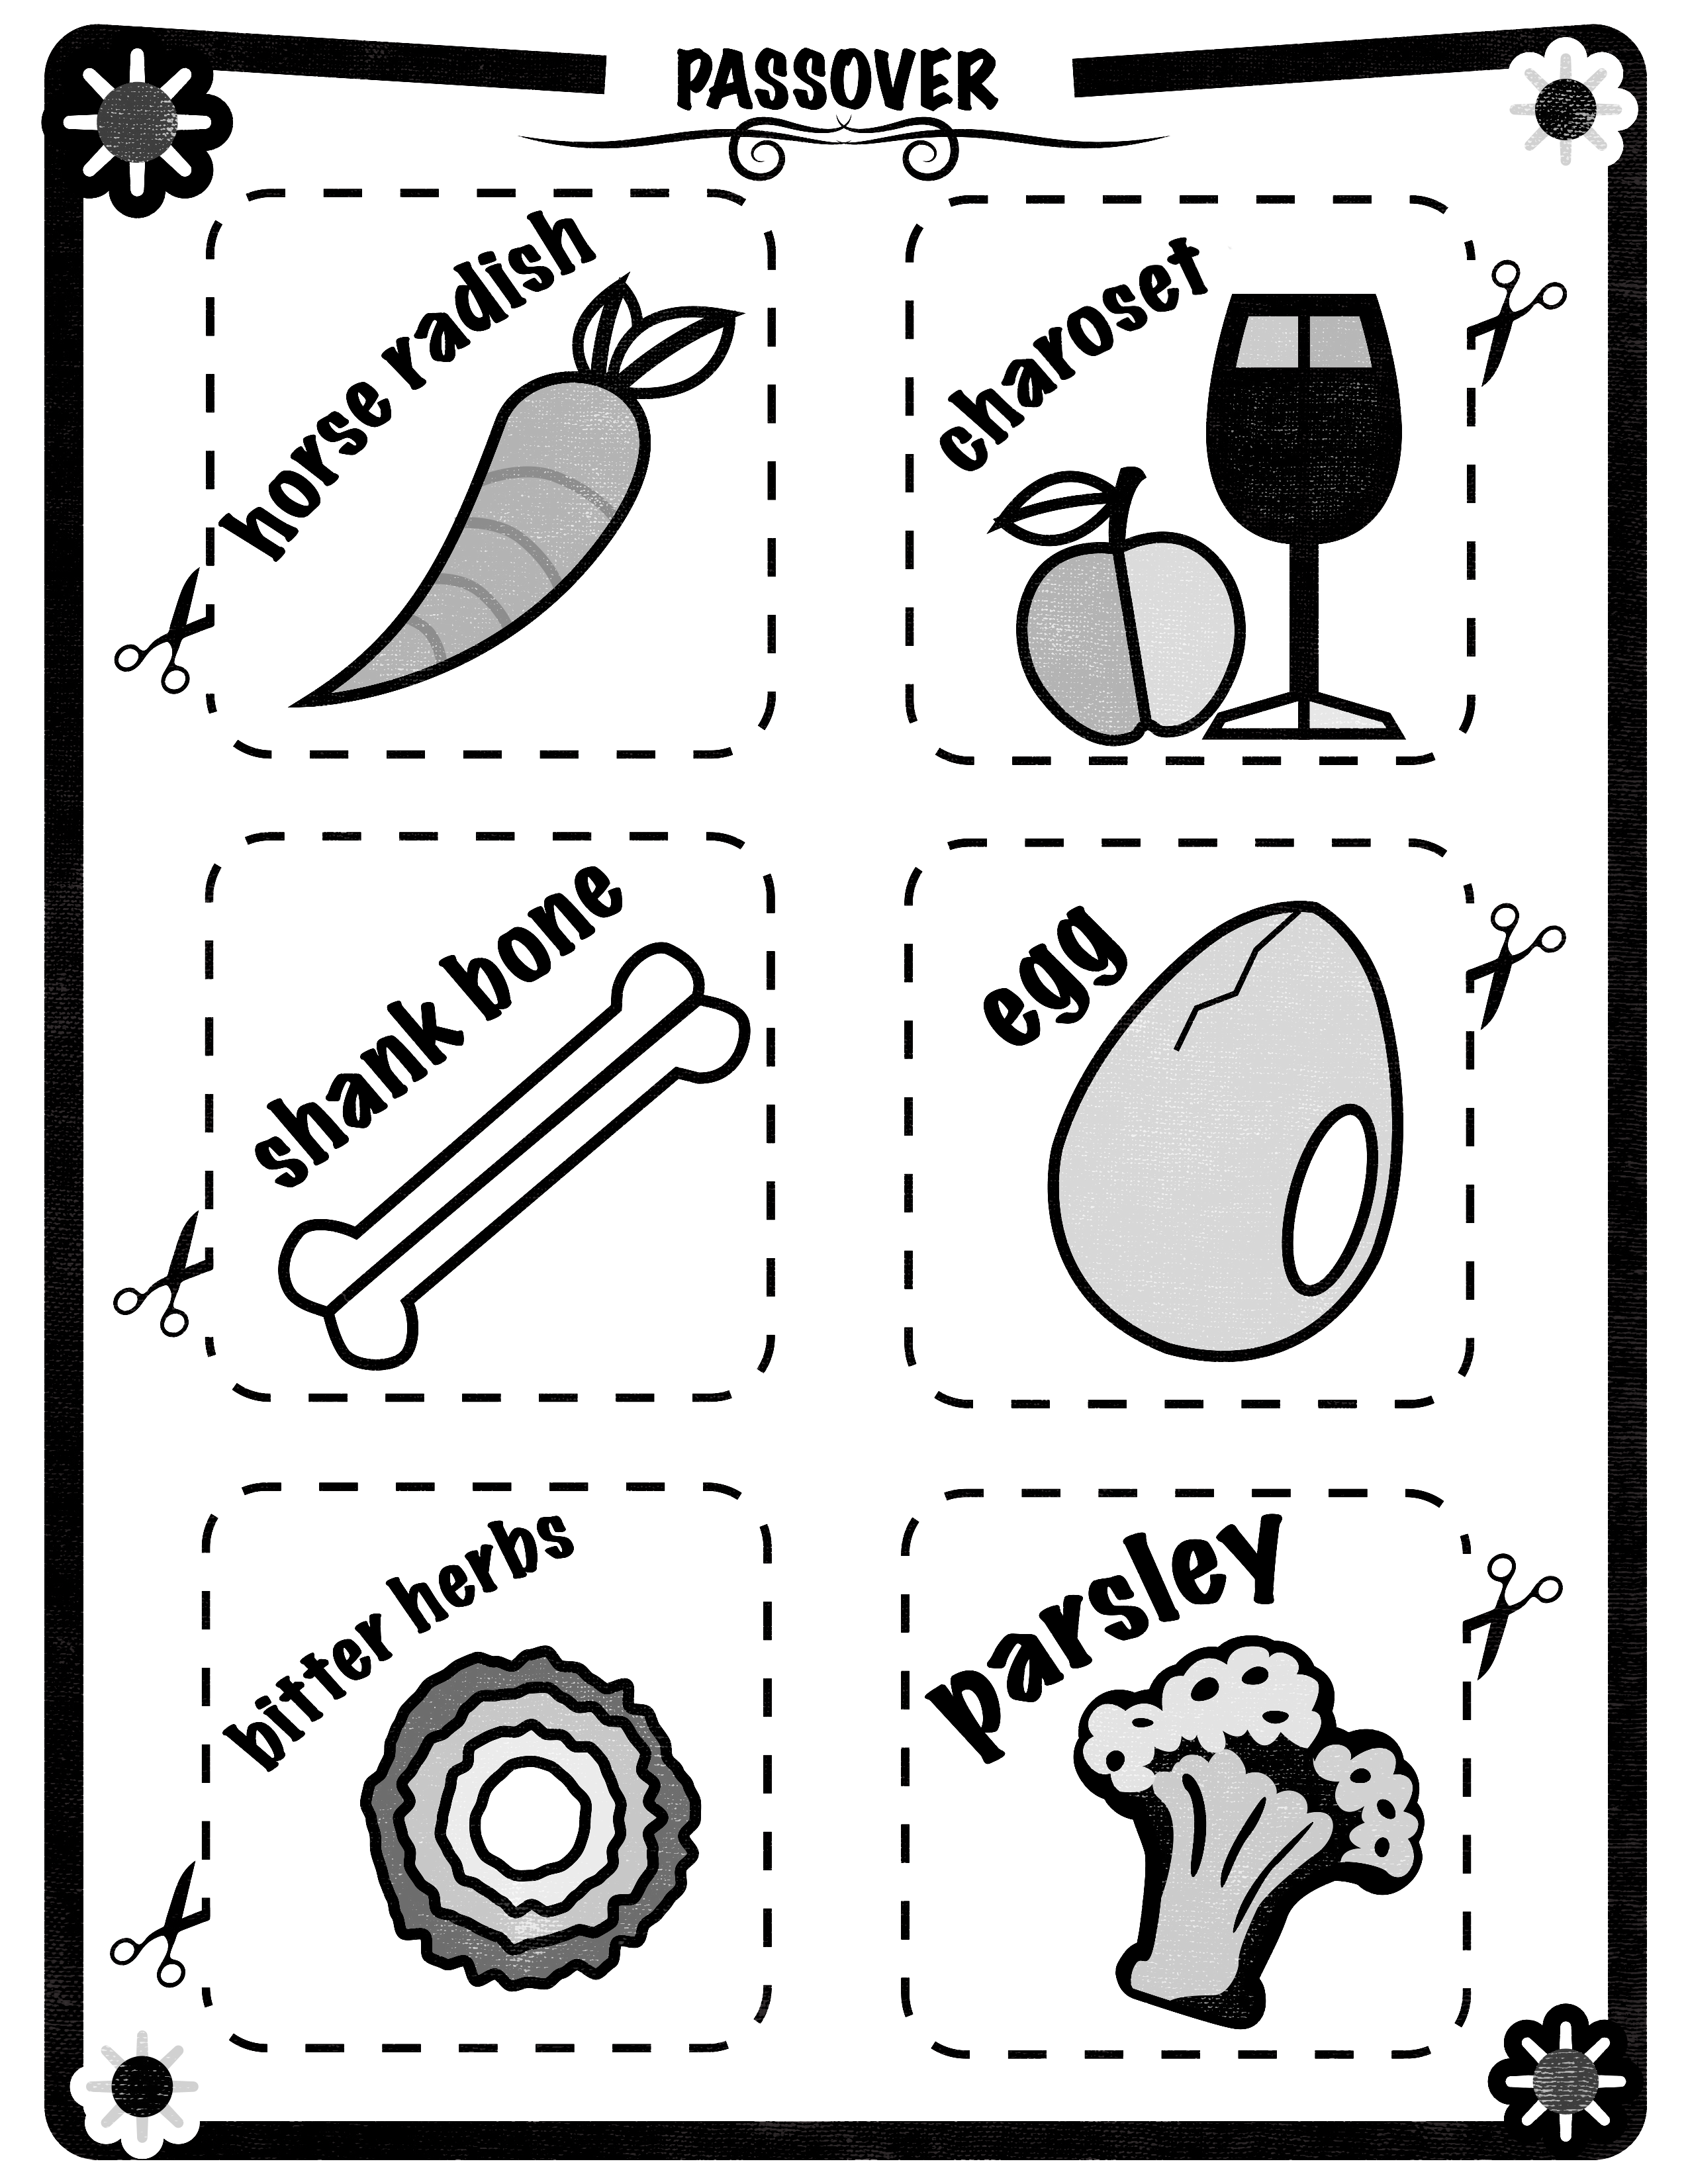 celebrate-passover-with-a-seder-plate-printable-pin-on-passover-craft